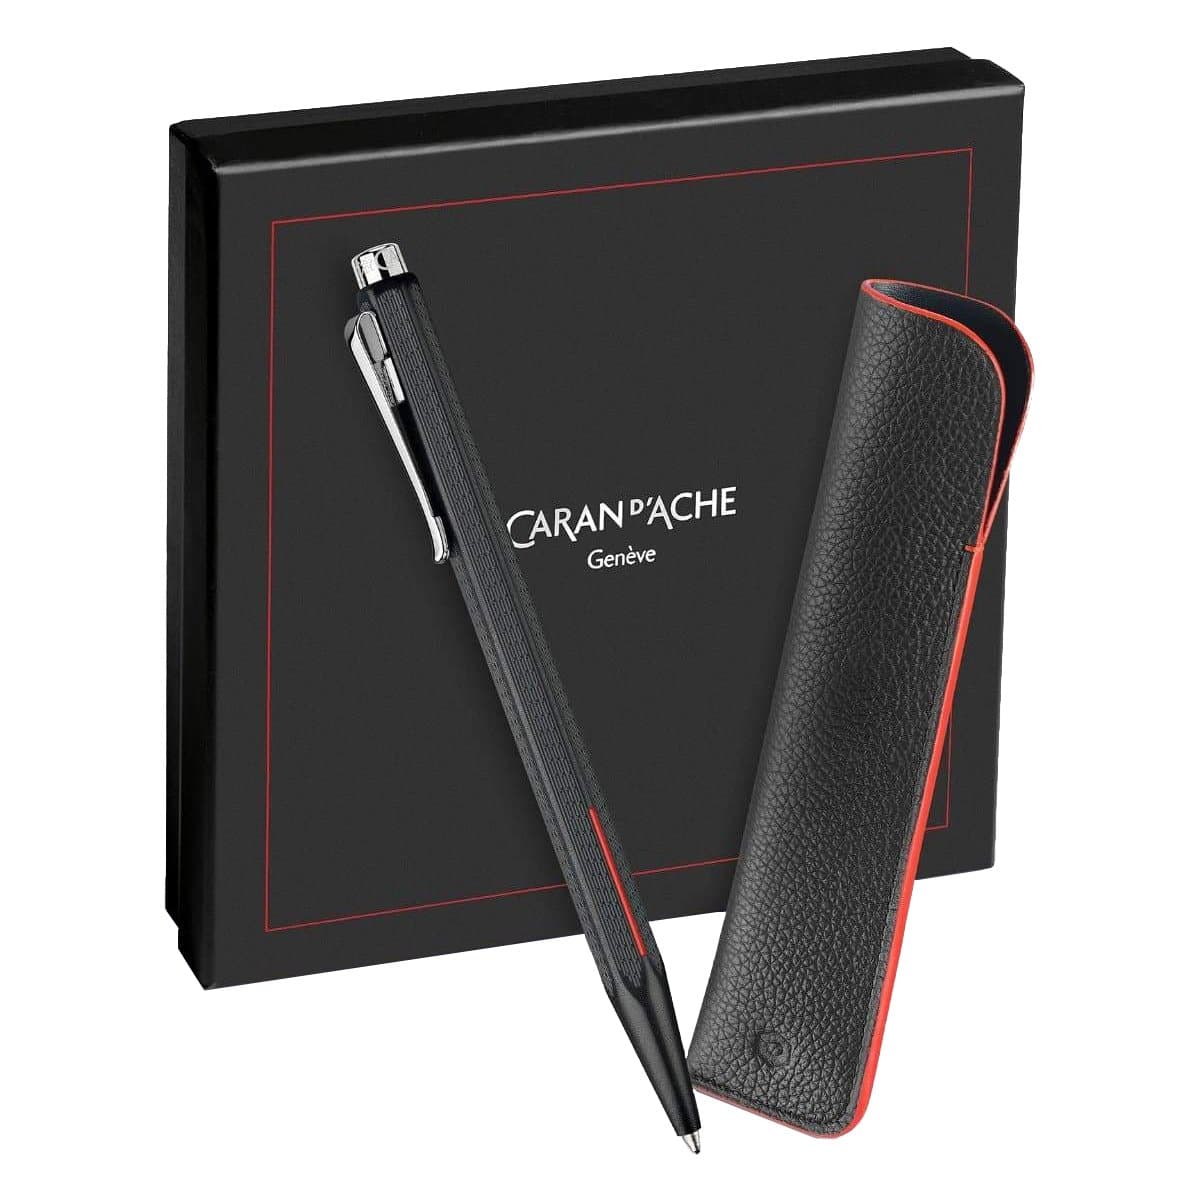 CARAN d'ACHE ECRIDOR RACING Gift Set Ballpoint Pen with Leather Pouche, 0.25mm, Black/Red